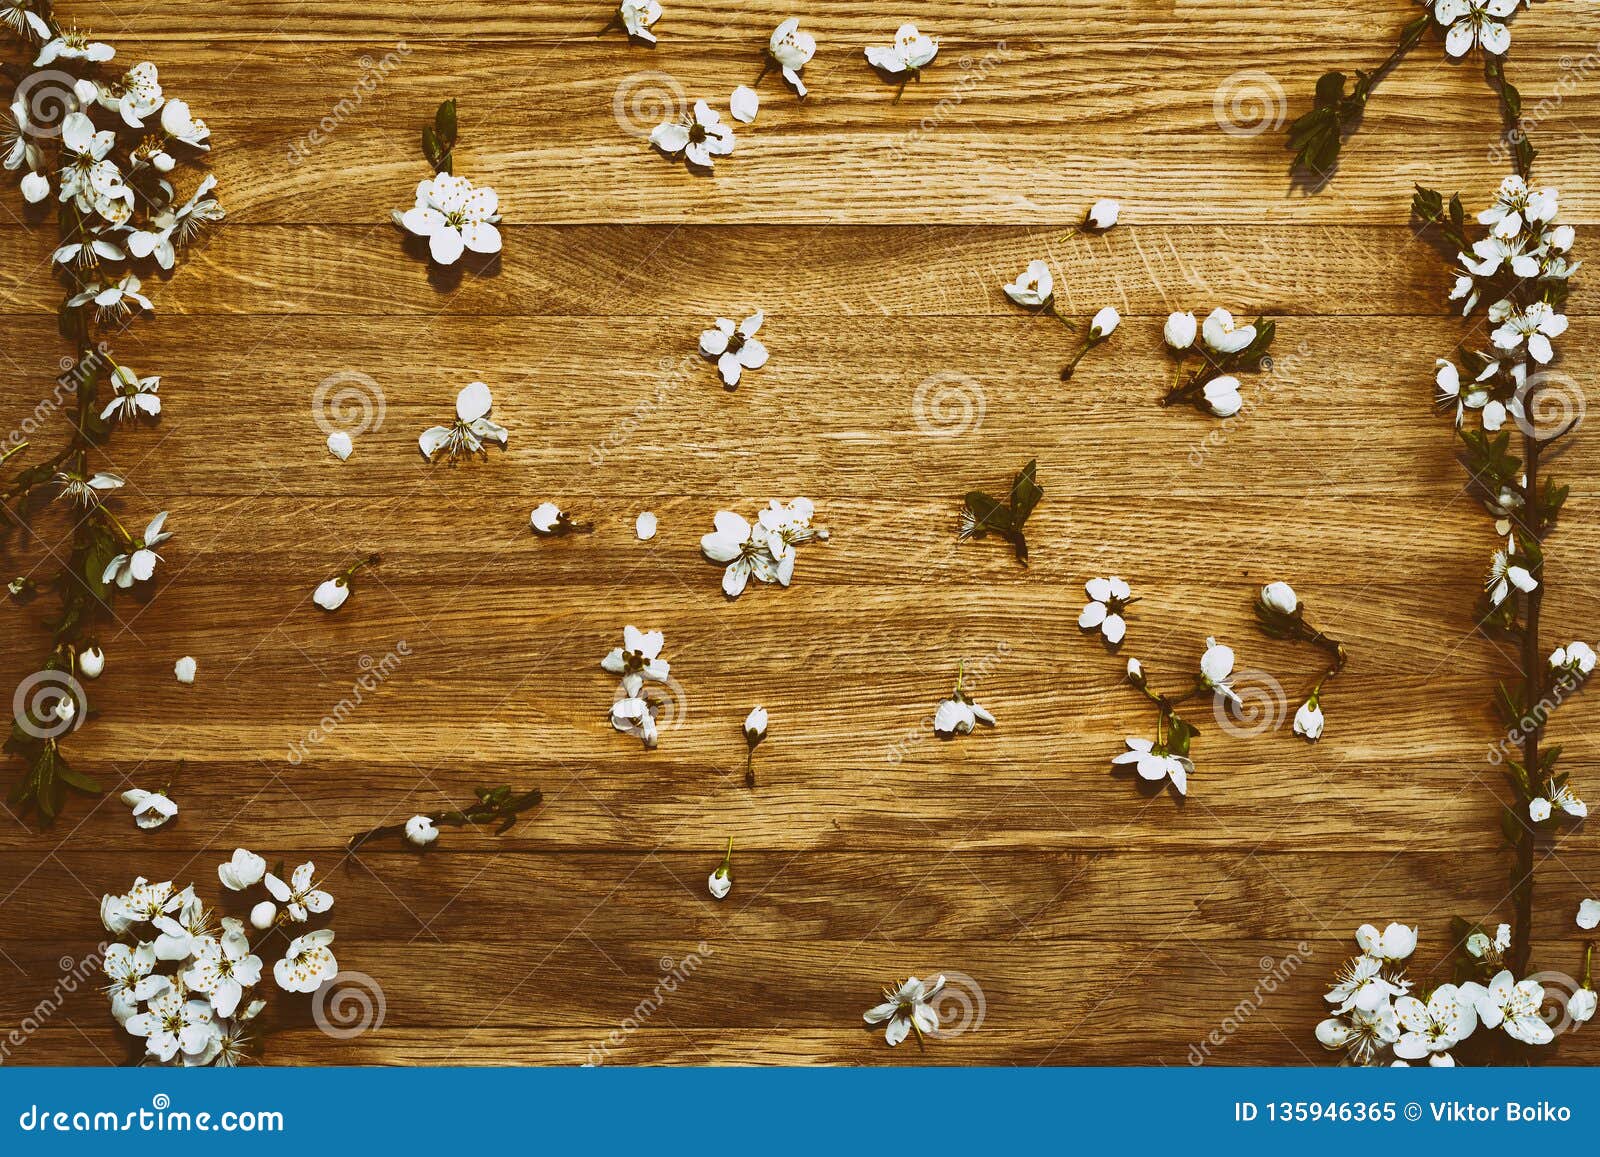 Spring Flowers Frame on Wooden Background Stock Image - Image of ...